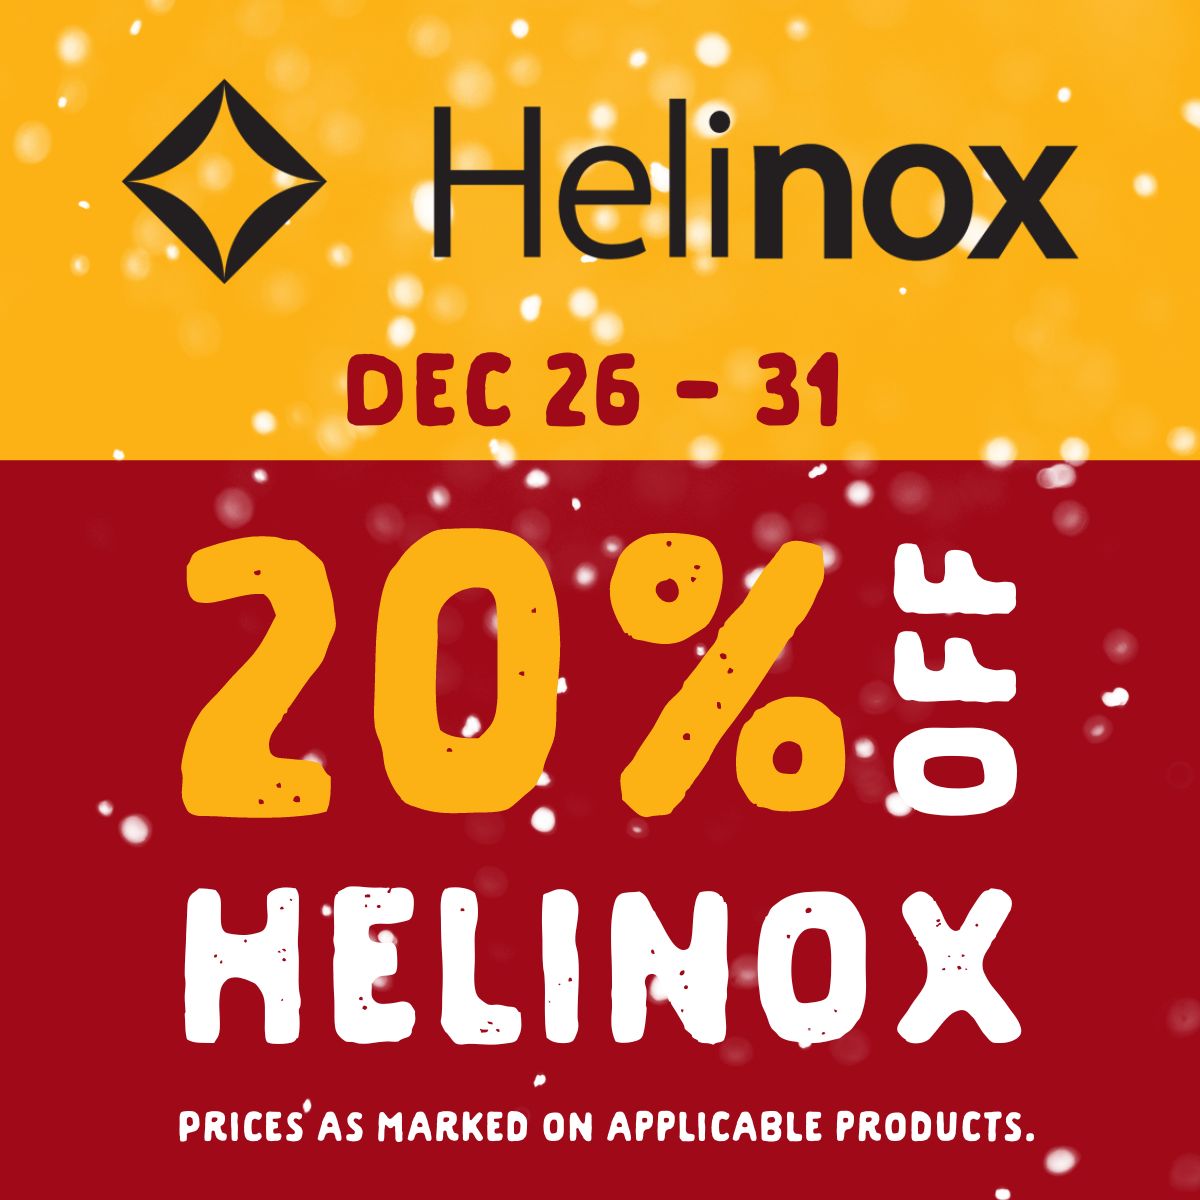 20% off Helinox from December 26 to 31. Prices as marked on applicable products.